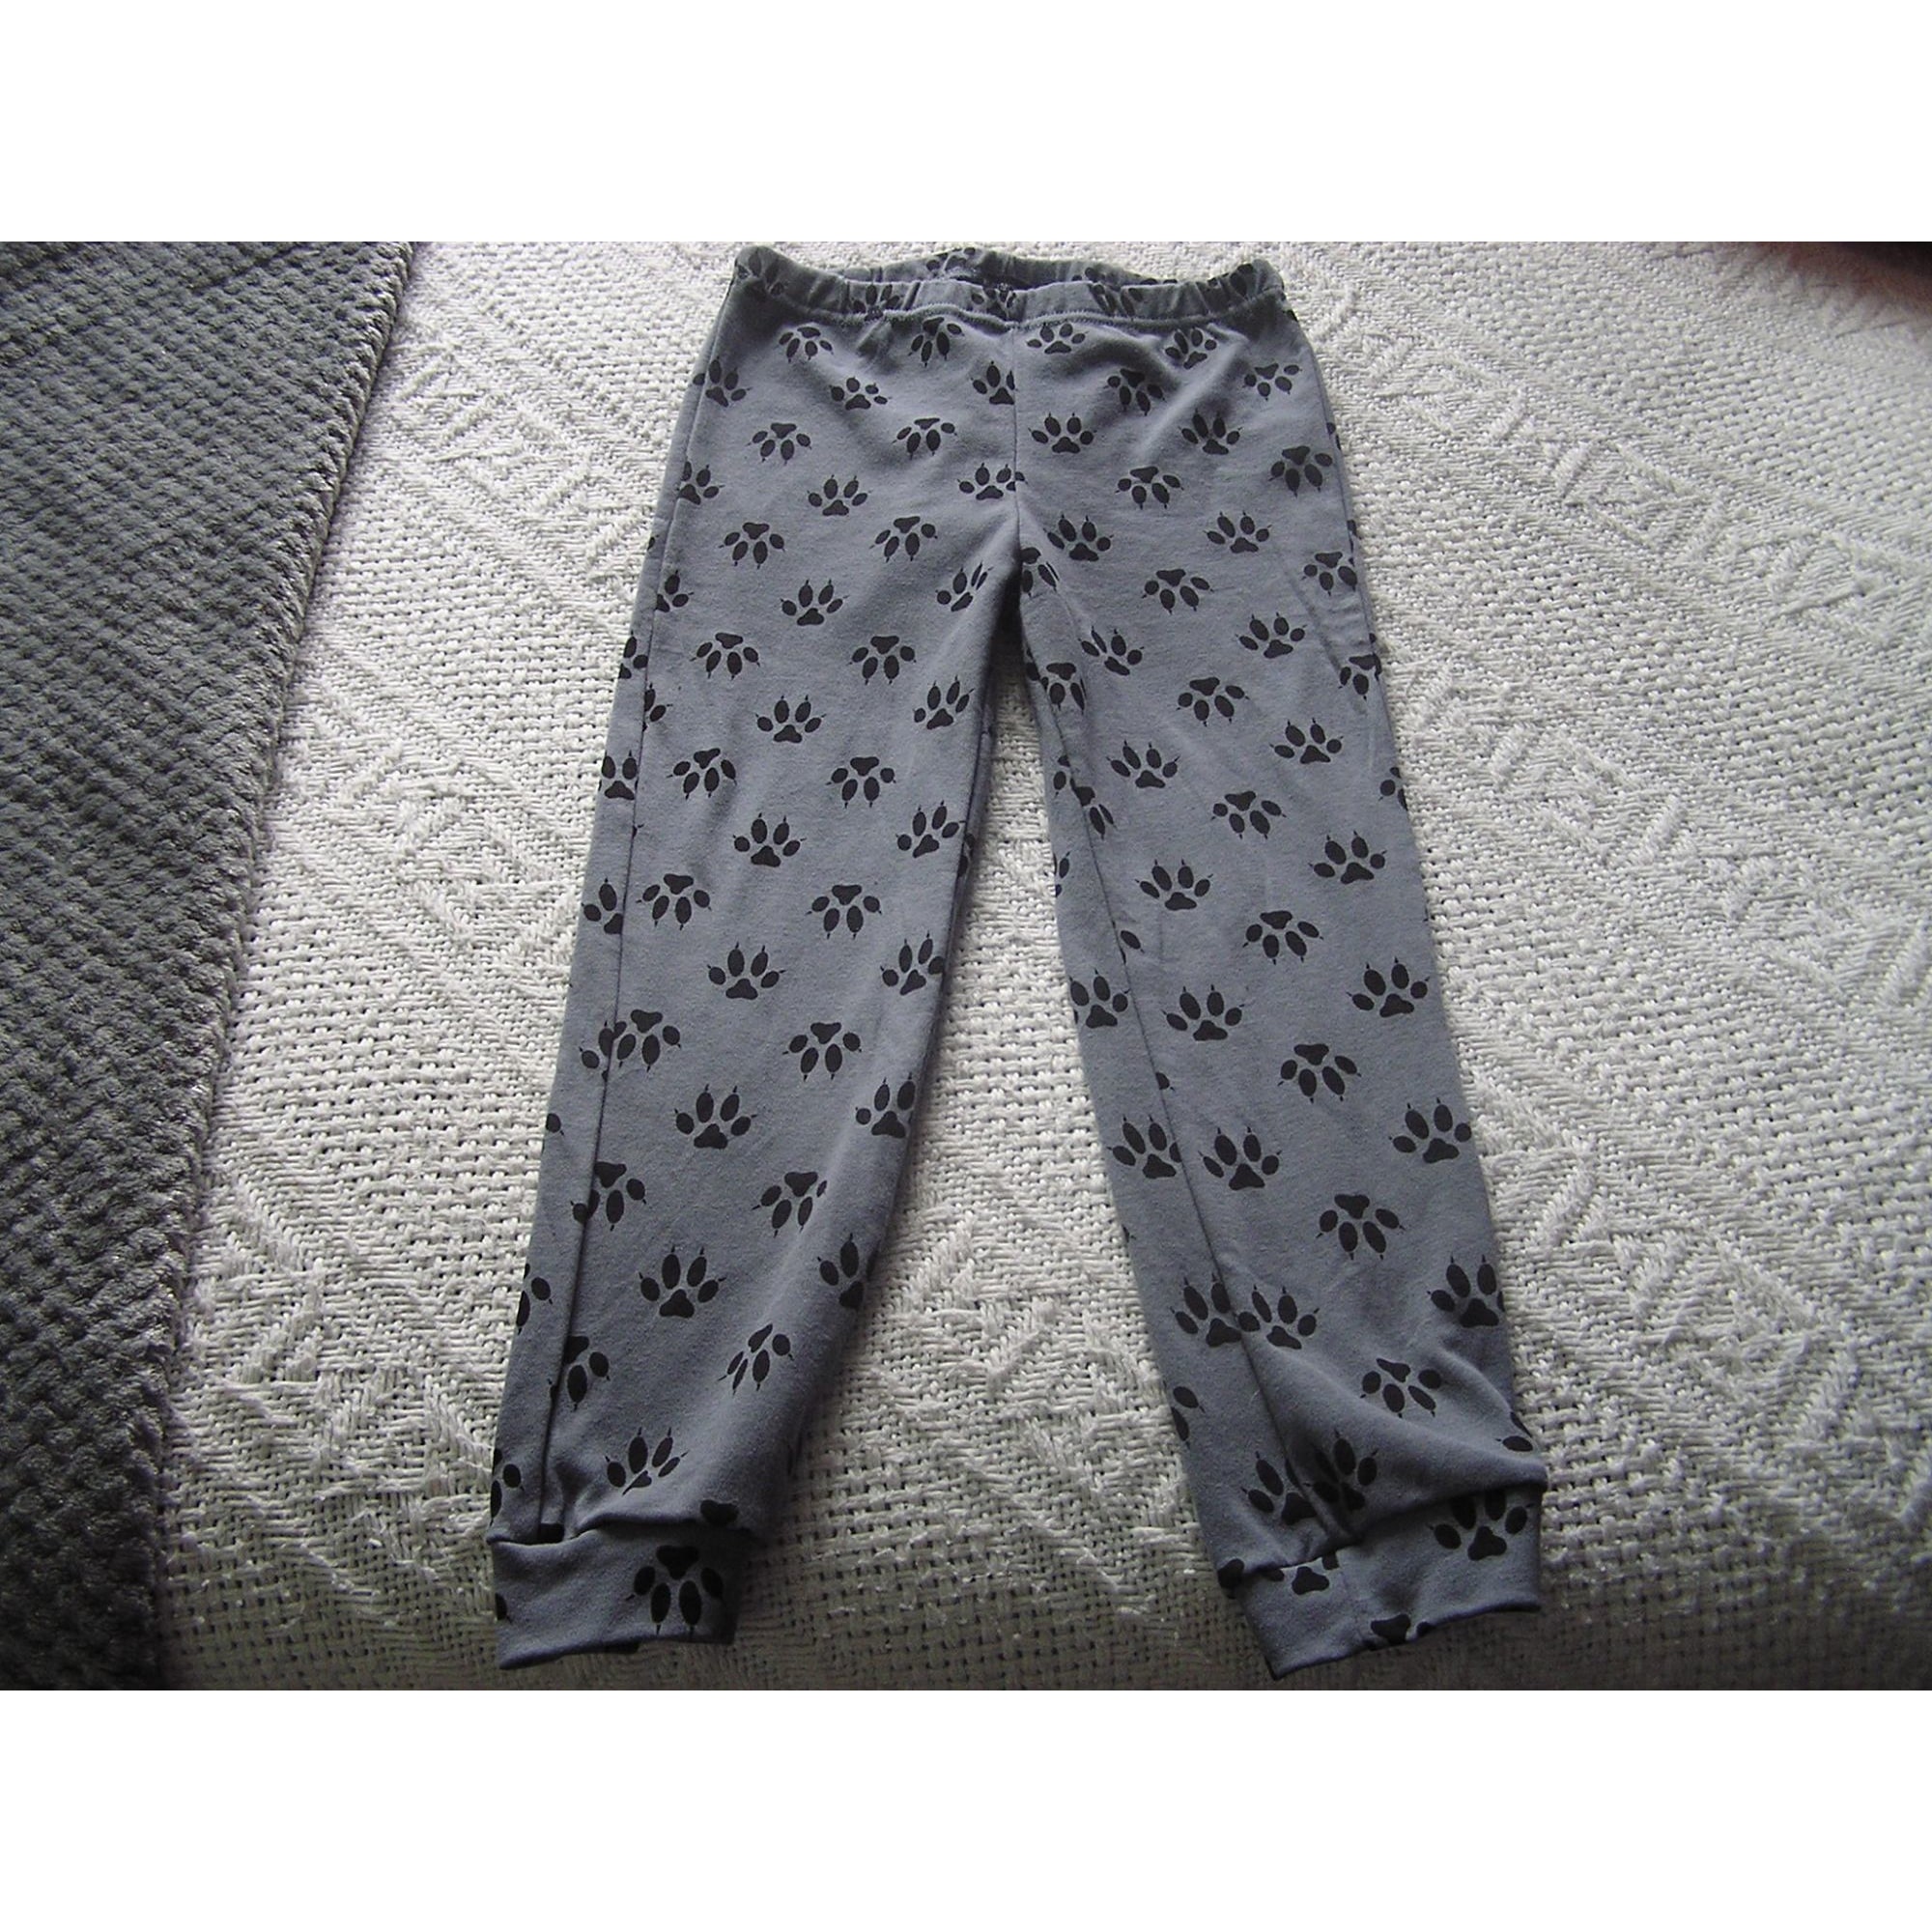 Pyjama IN EXTENSO Gray, charcoal